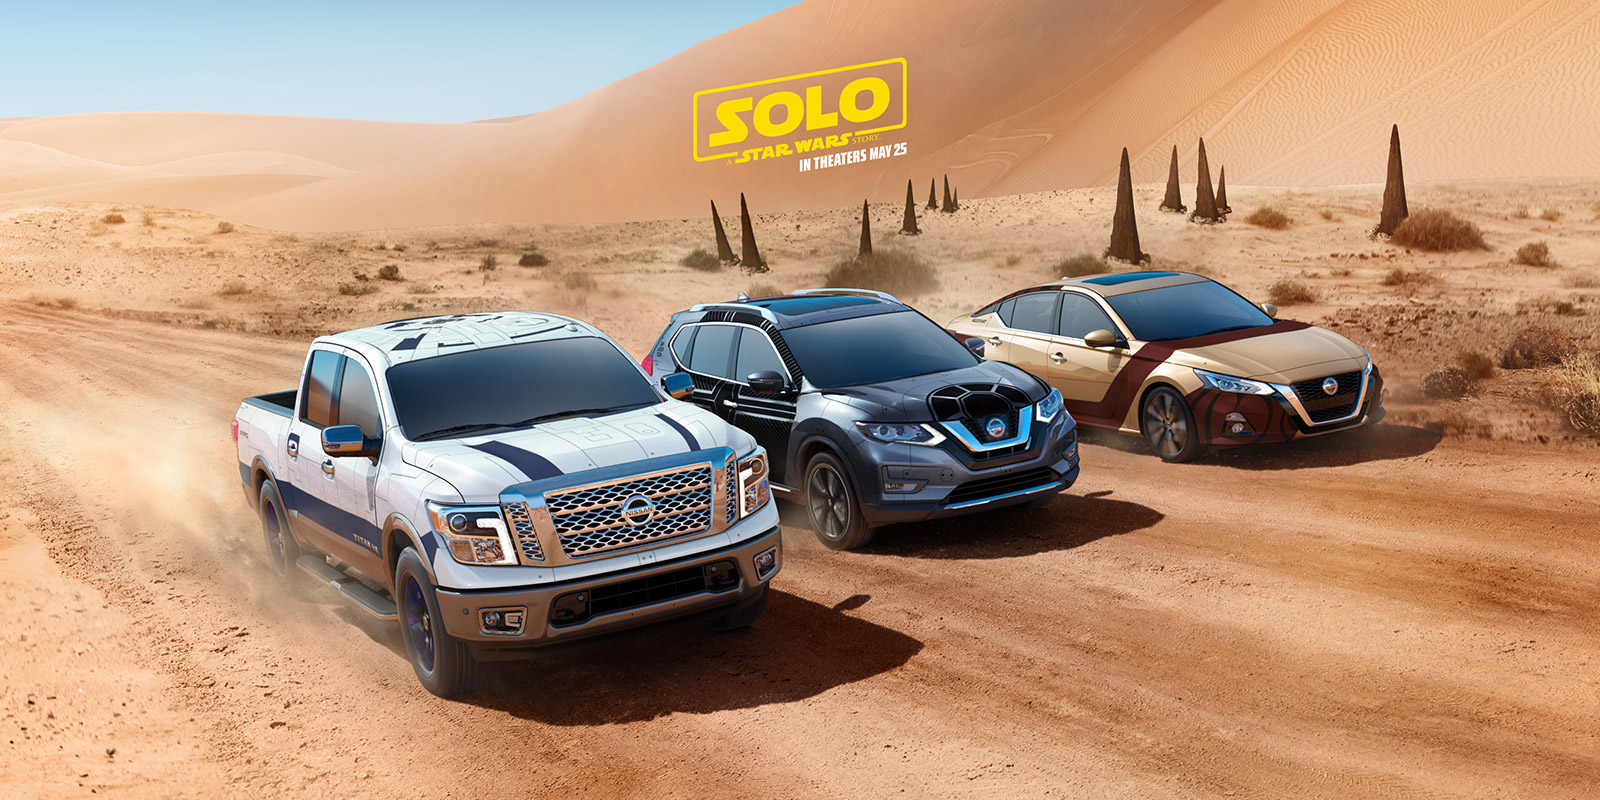 Watch: Nissan launches promotional campaign celebrating the new star wars film